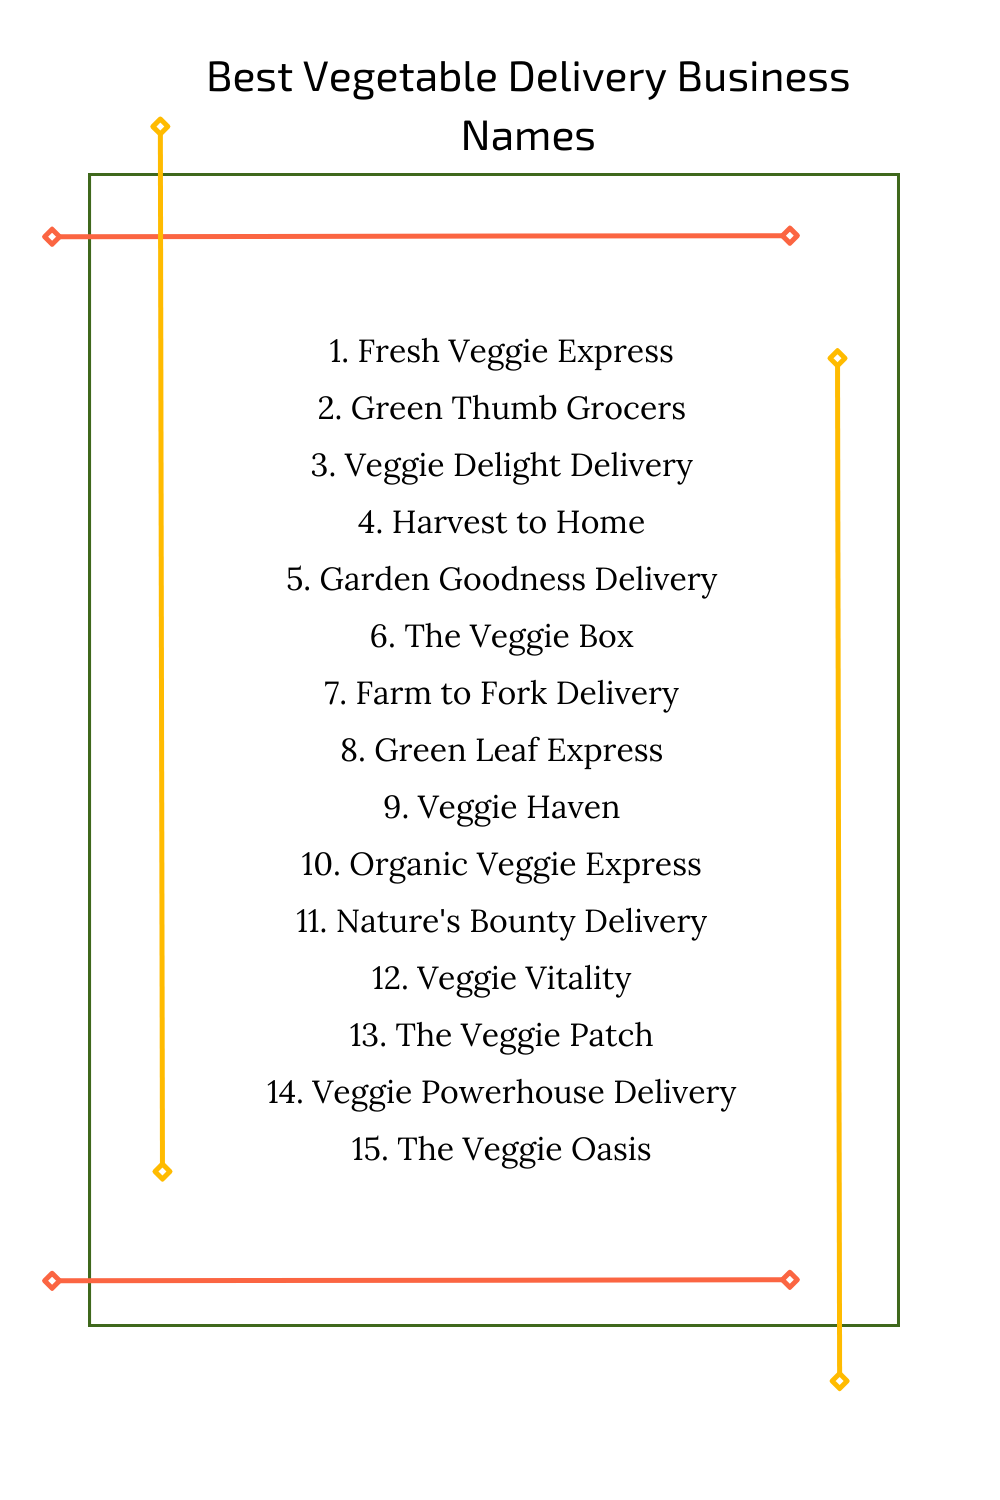 Best Vegetable Delivery Business Names